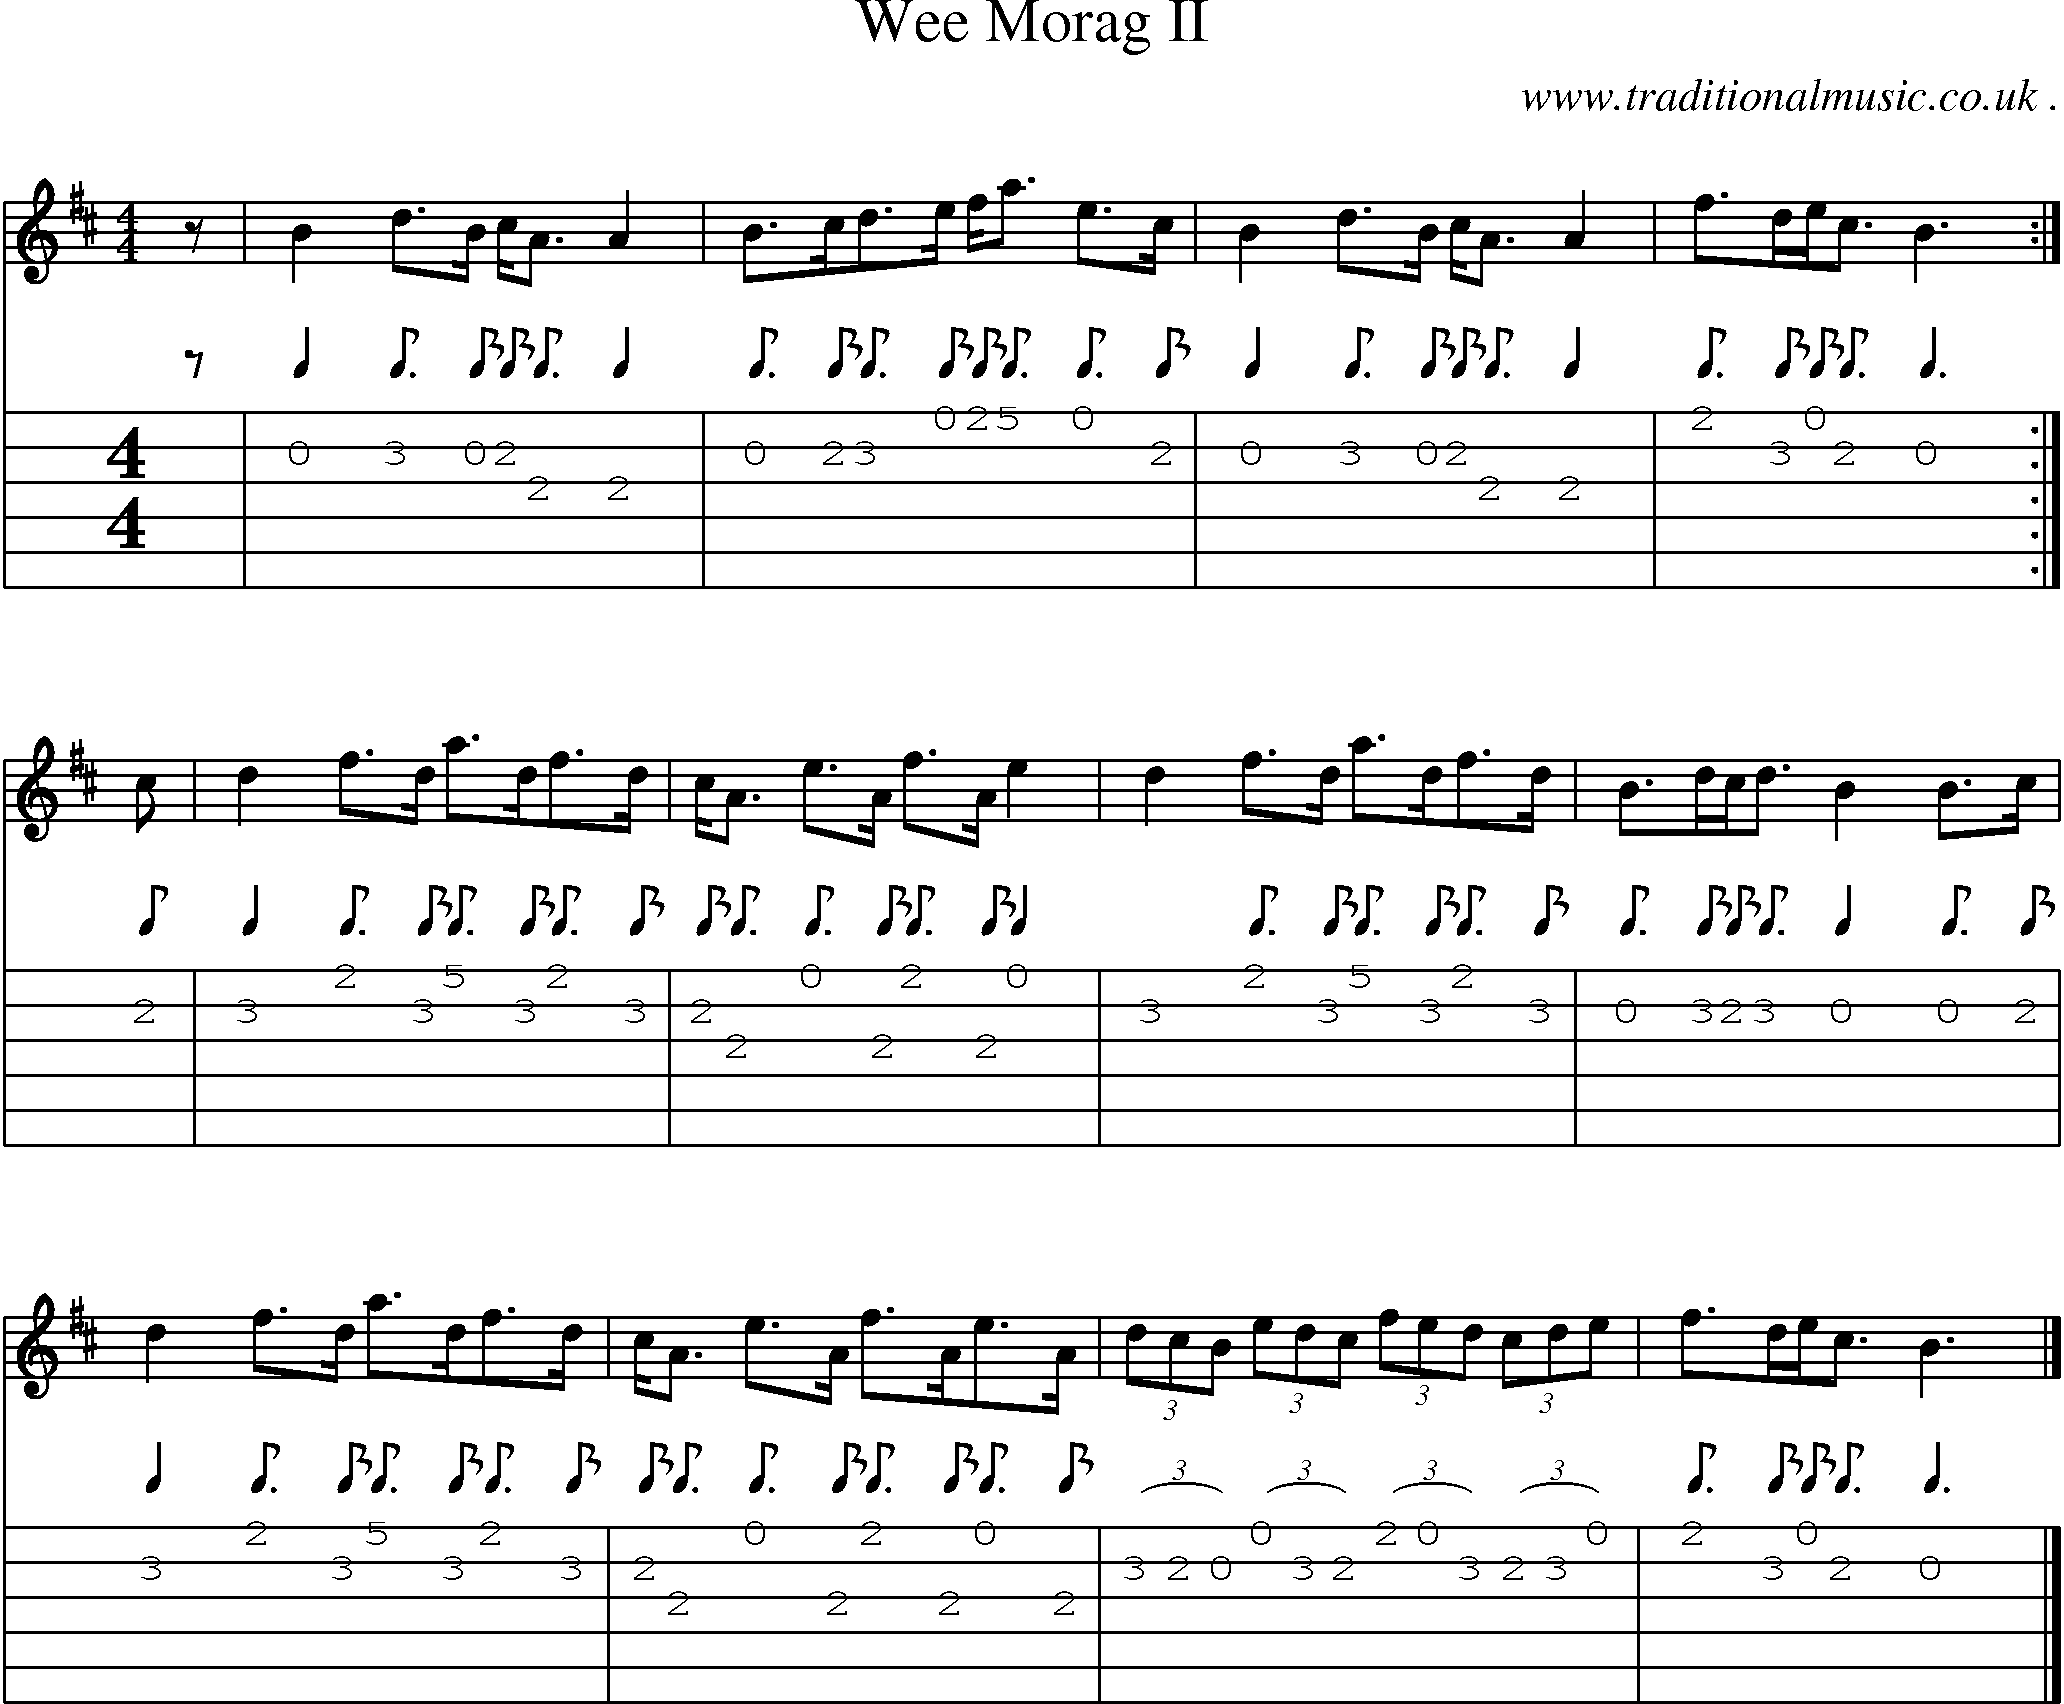 Sheet-music  score, Chords and Guitar Tabs for Wee Morag Ii